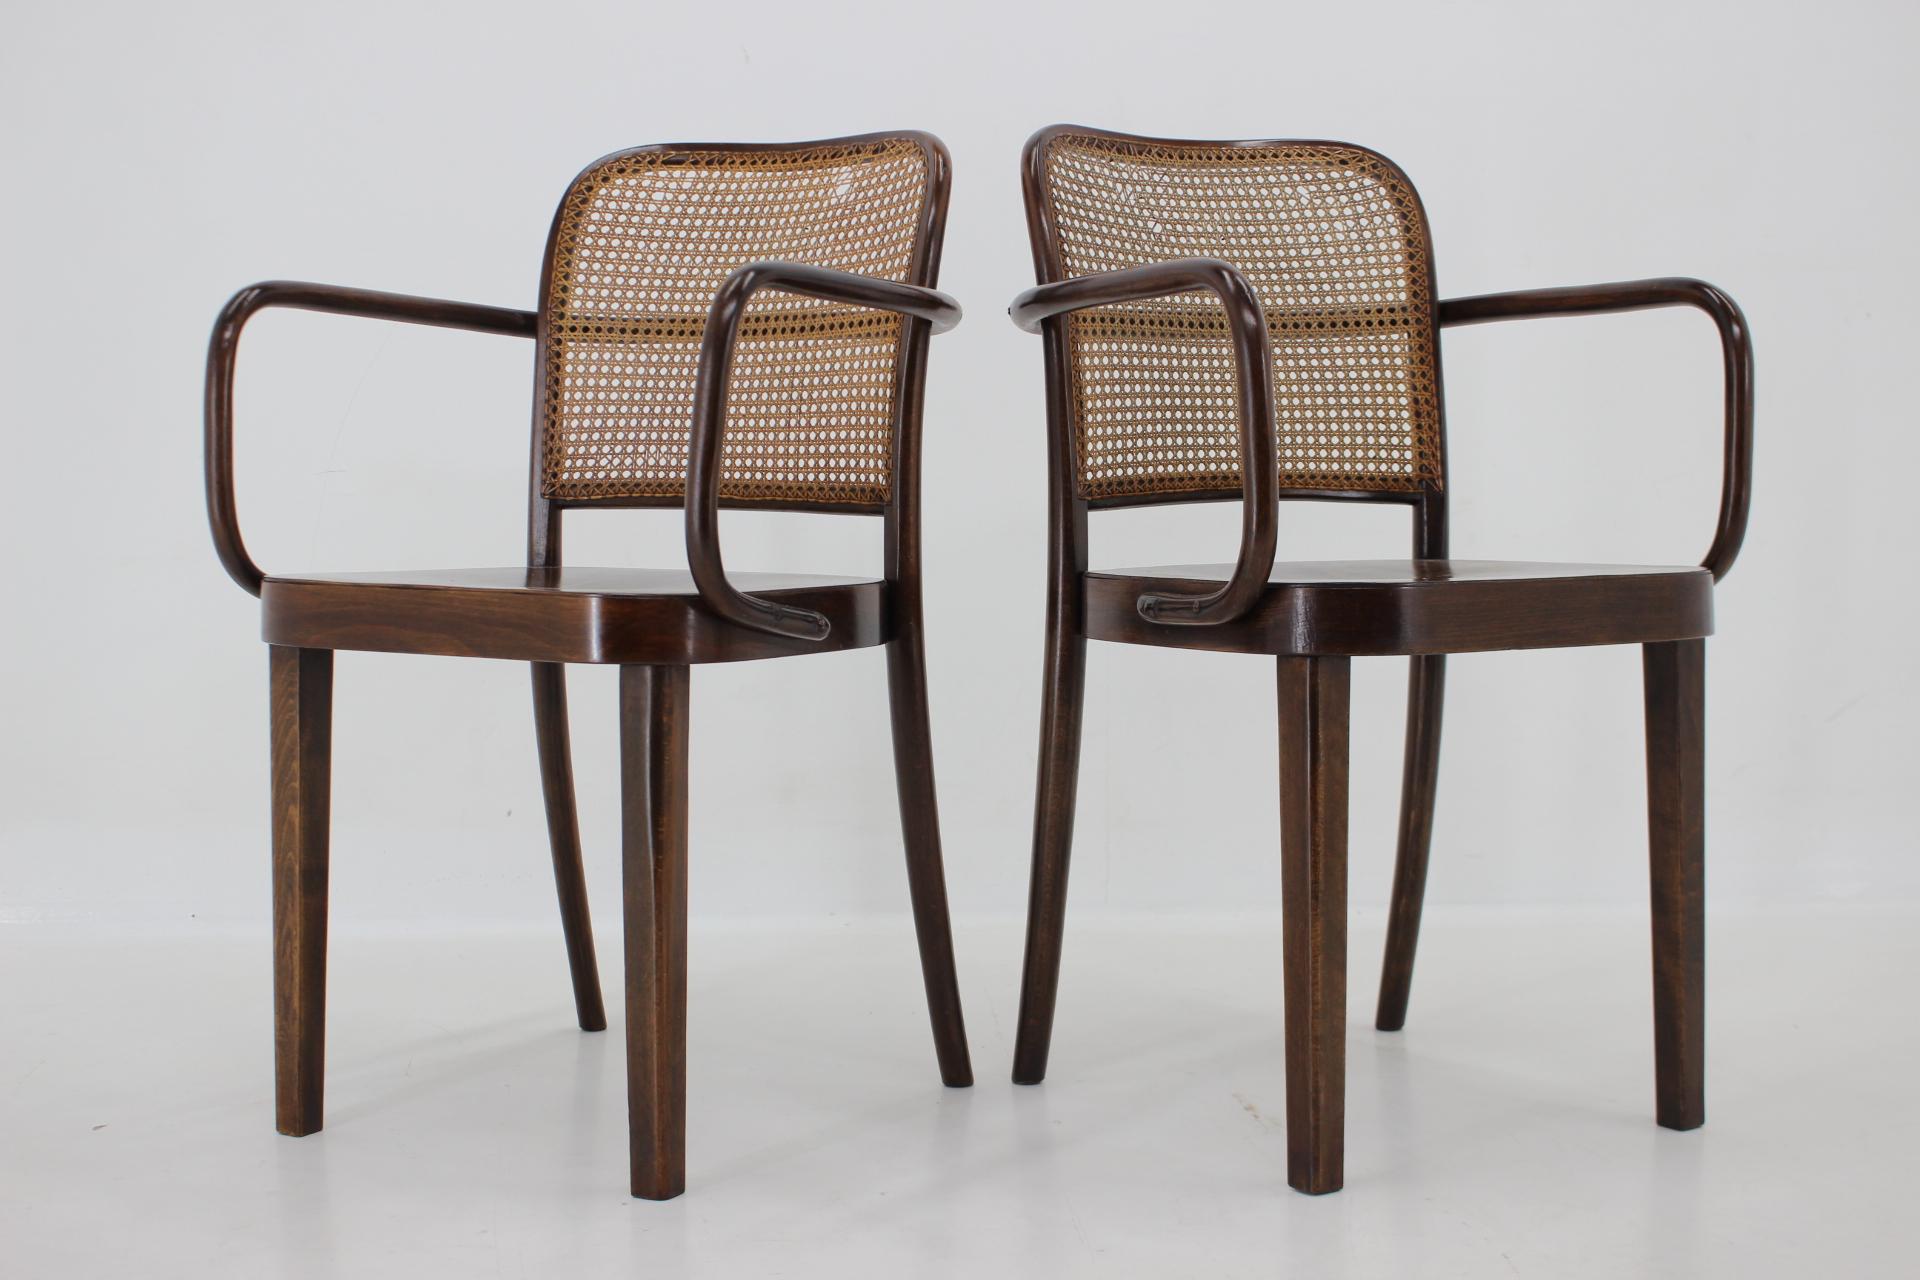 Mid-Century Modern 1920s Josef Hoffmann Bentwood Chairs, No. 811 for Thonet, Czechoslovakia For Sale